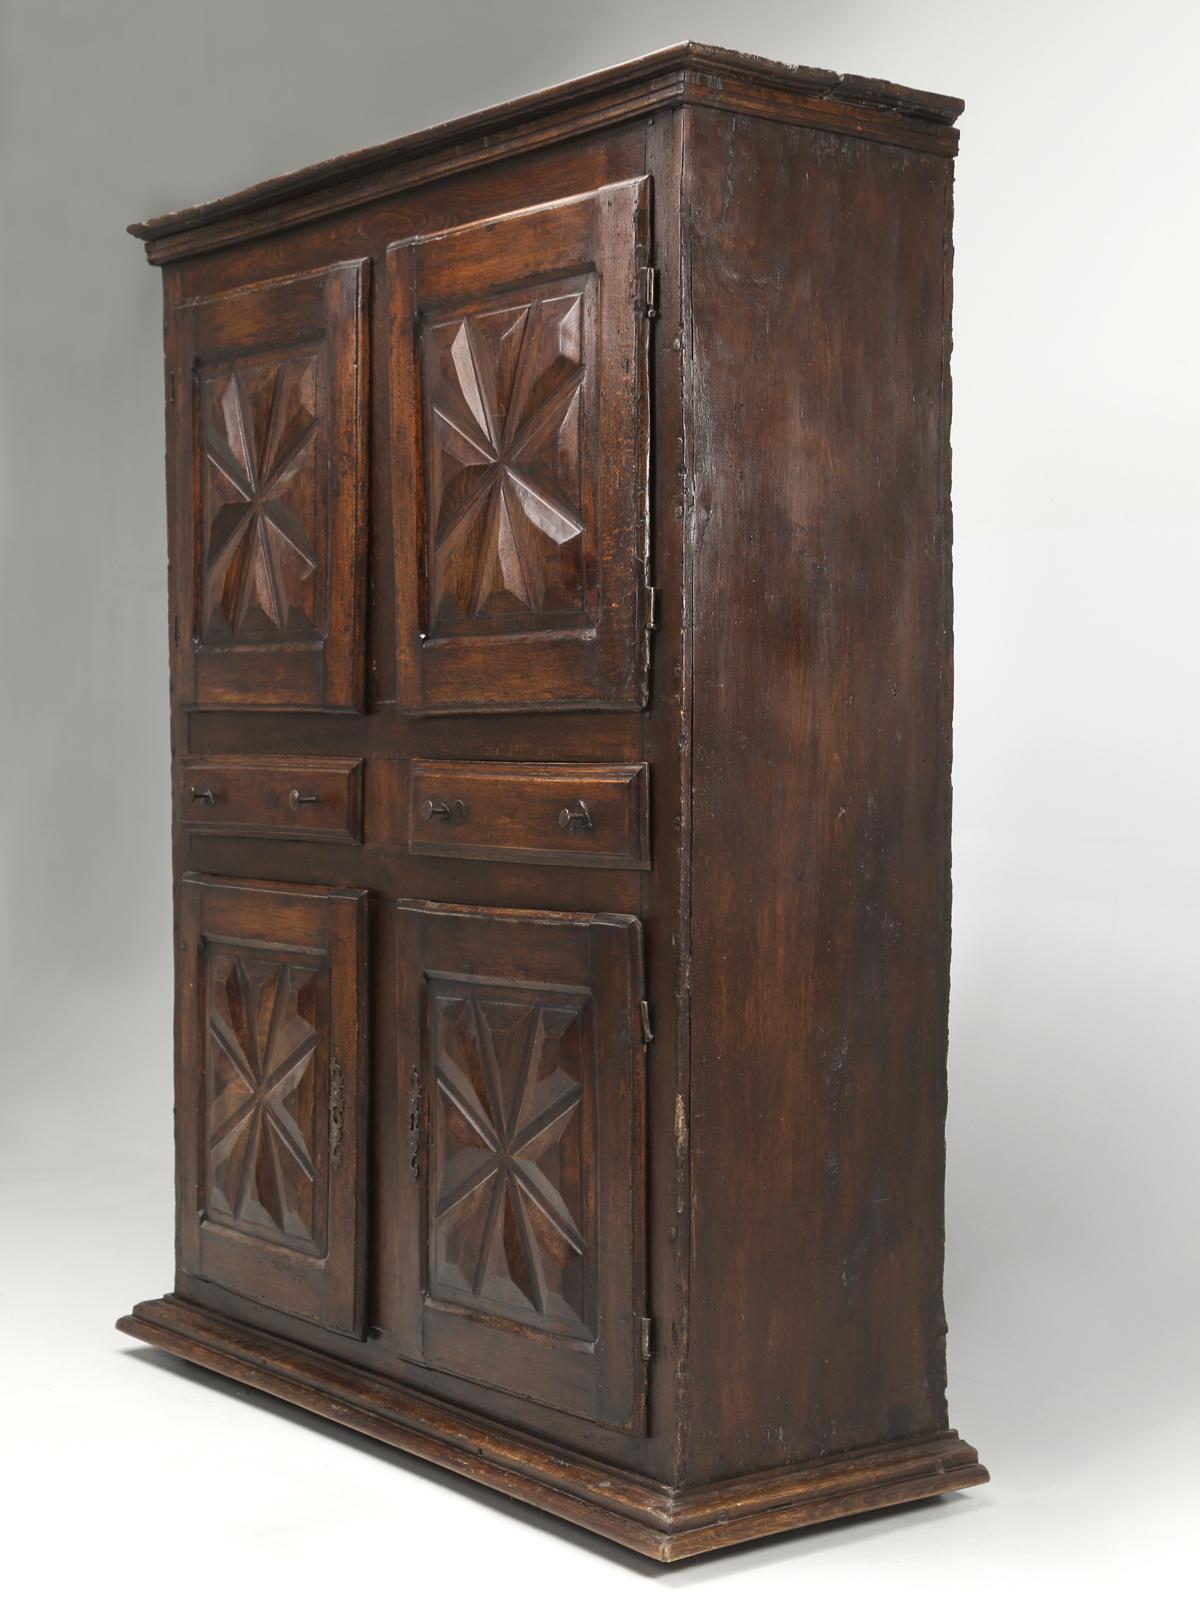 Very authentic 300-year-old French 4-door cupboard, with 2-drawers, or some might call it an armoire. In truth, the 4-doors make more a much more useful cabinet. The original patina or wear would be impossible to fake and we have every reason to